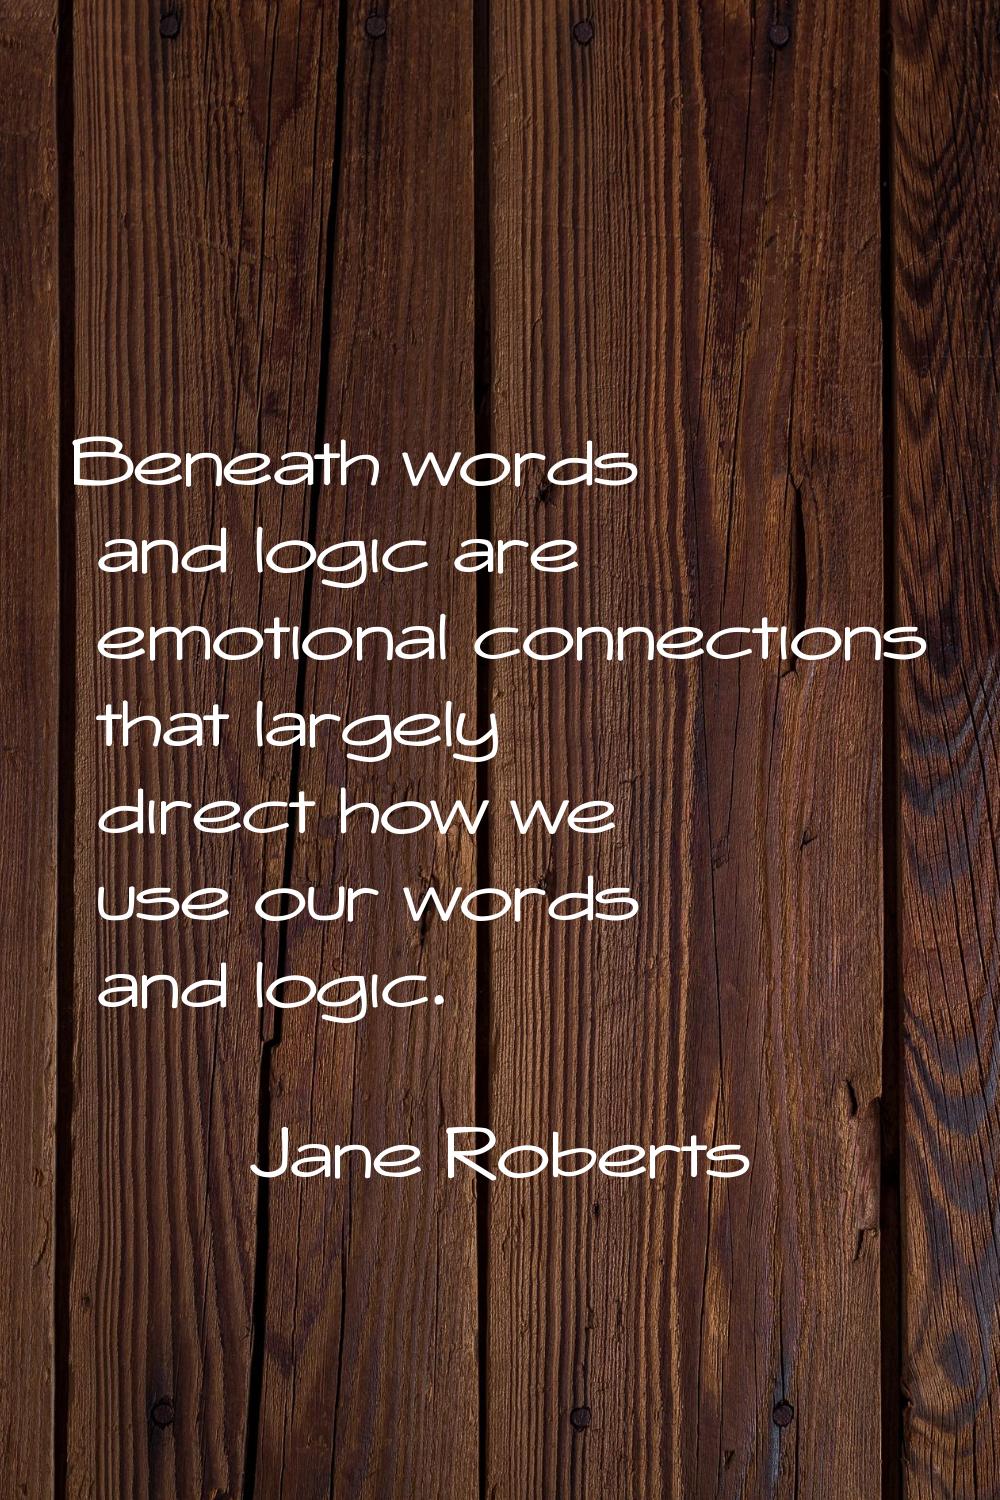 Beneath words and logic are emotional connections that largely direct how we use our words and logi